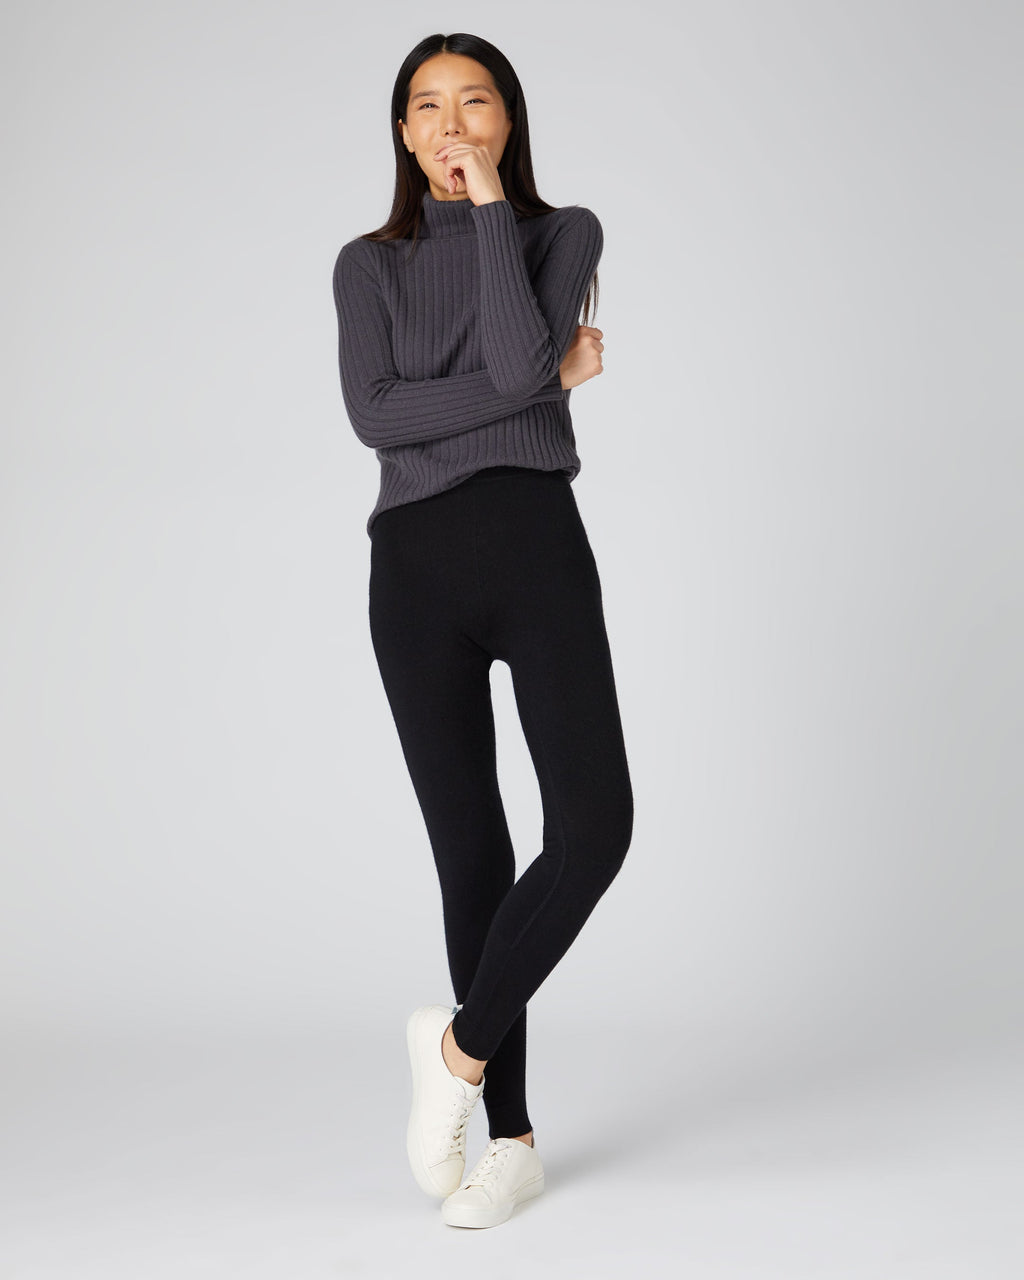 Thick Cashmere Leggings For A Trendy Fit - Inspire Uplift